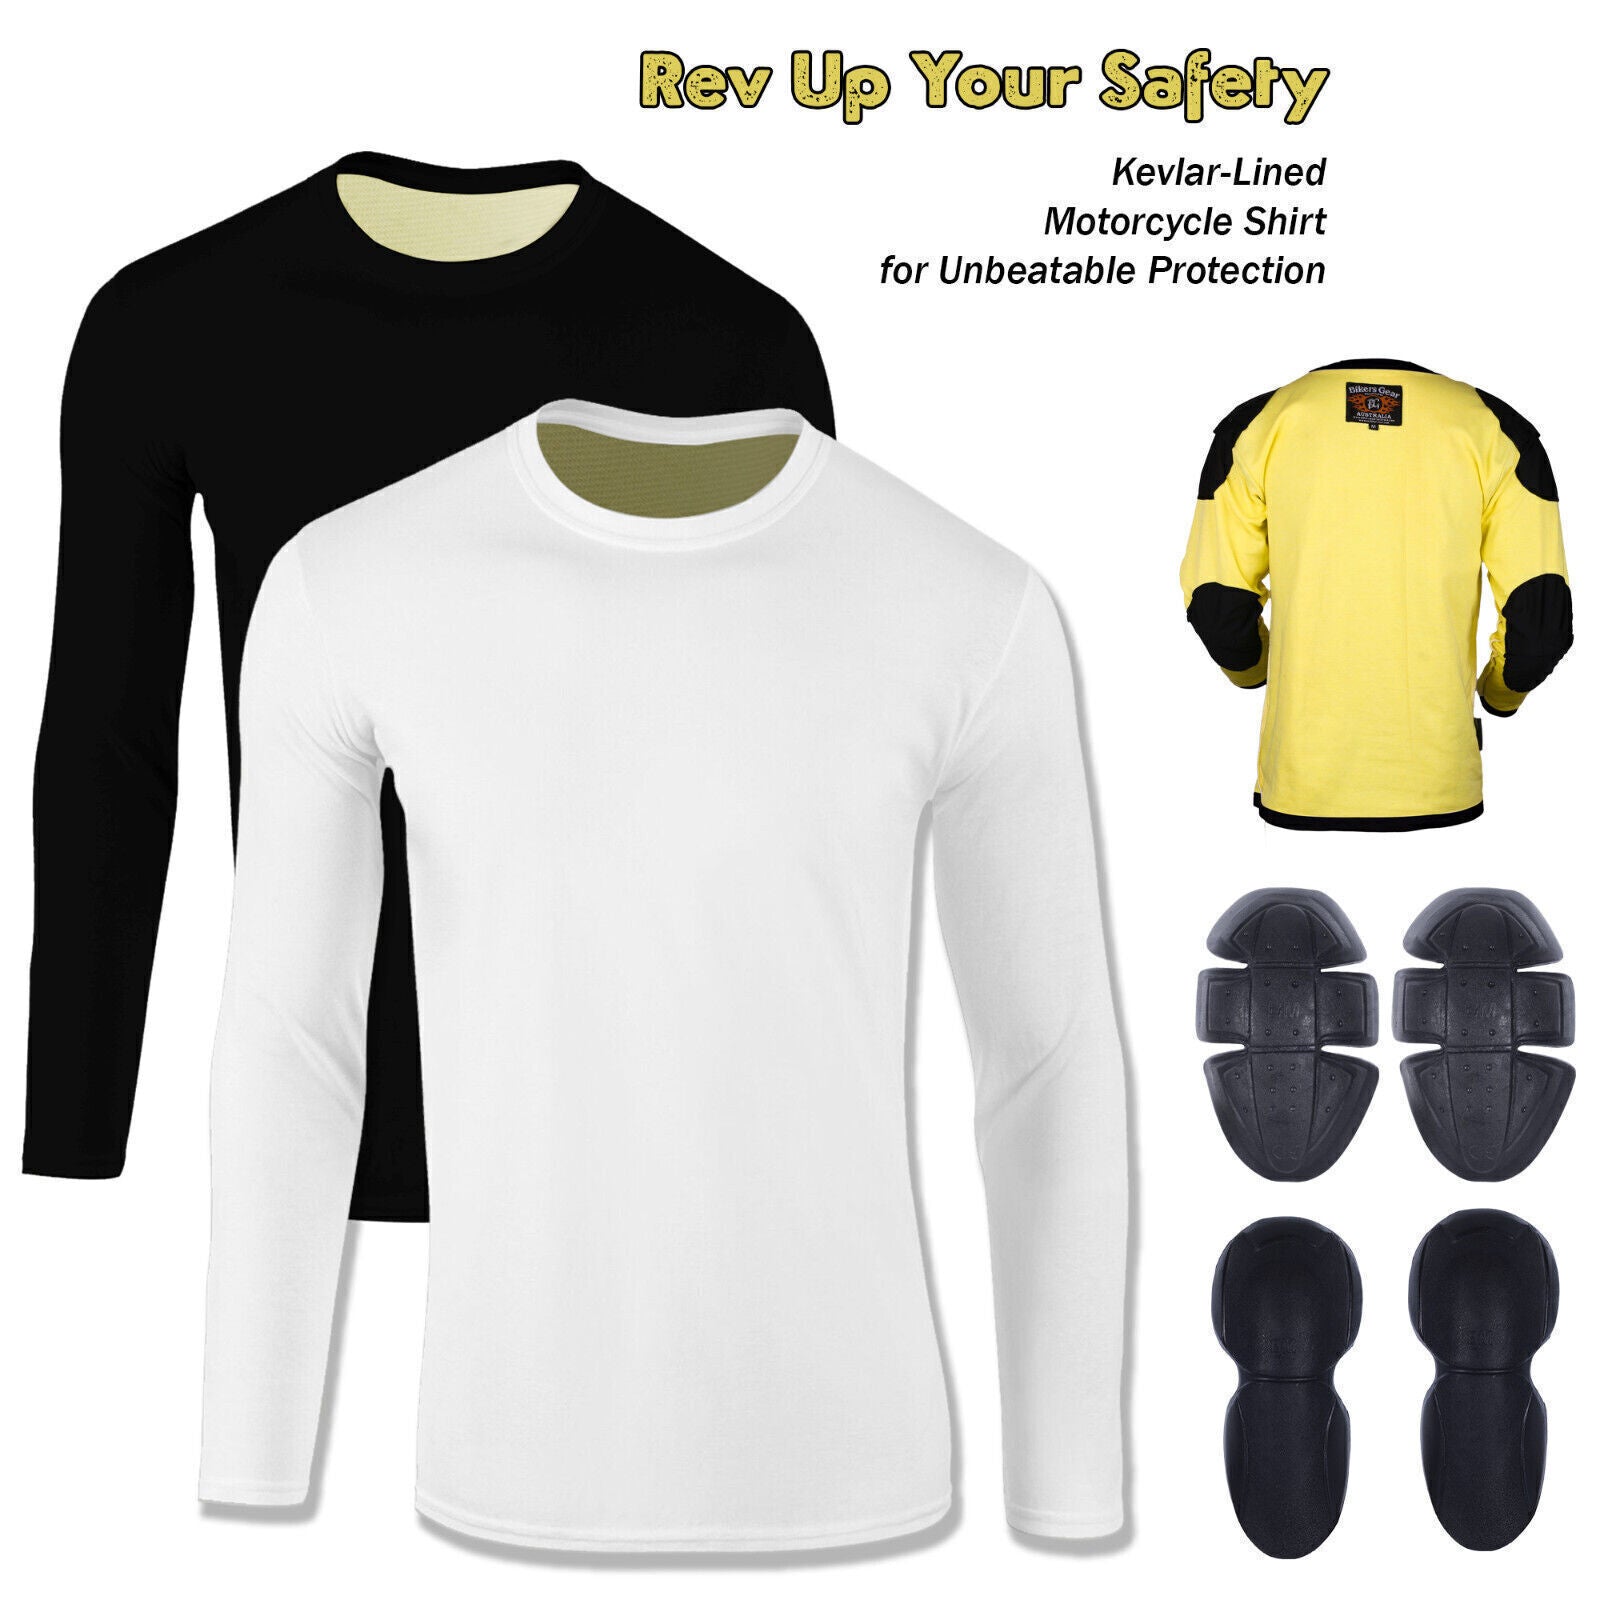 Motorcycle Full Kevlar Lined T-Shirt Ideal for under your jacket